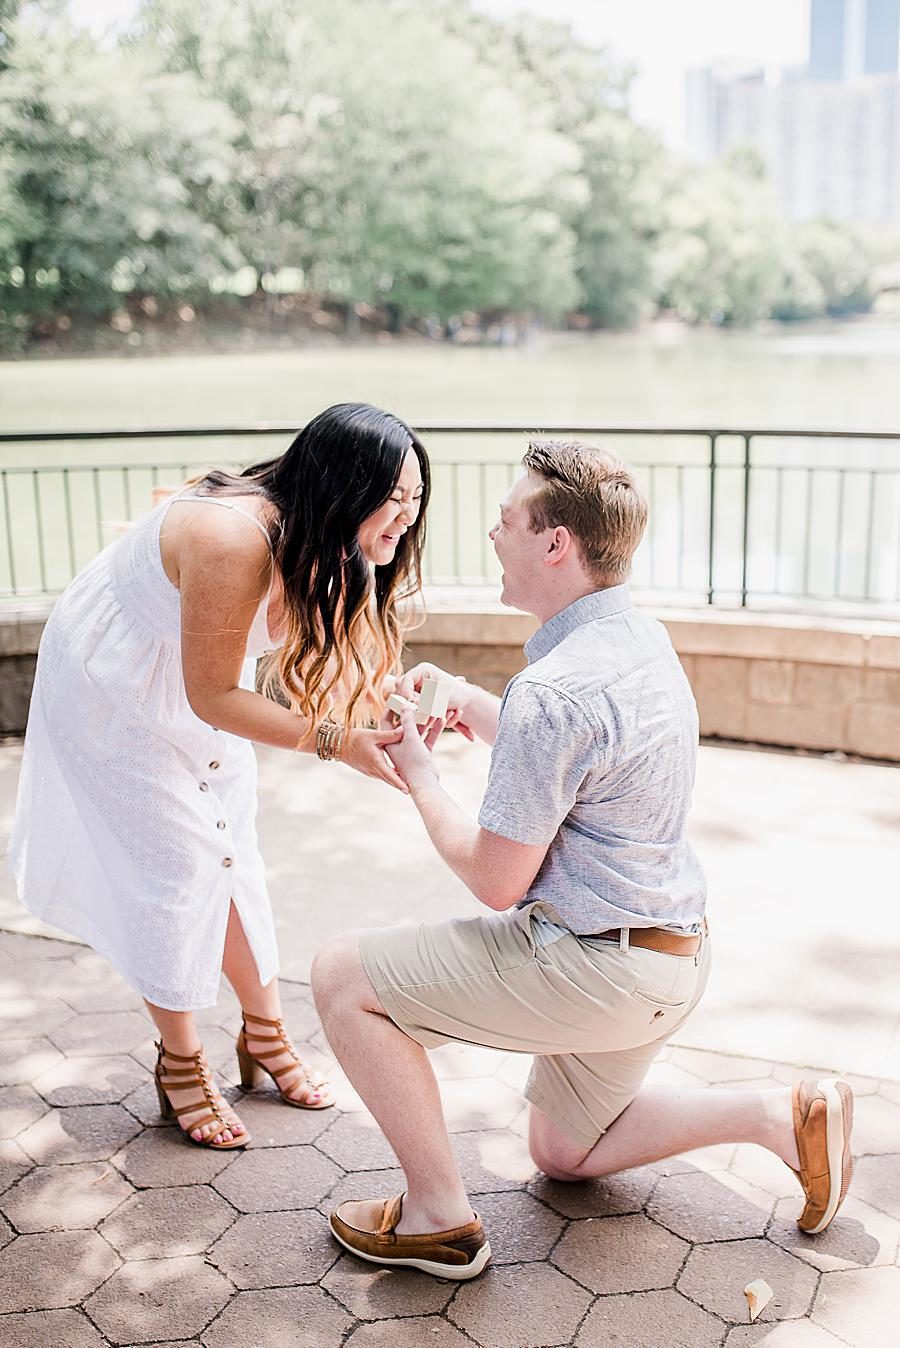 Putting on the ring at this Piedmont Park Proposal by Knoxville Wedding Photographer, Amanda May Photos.